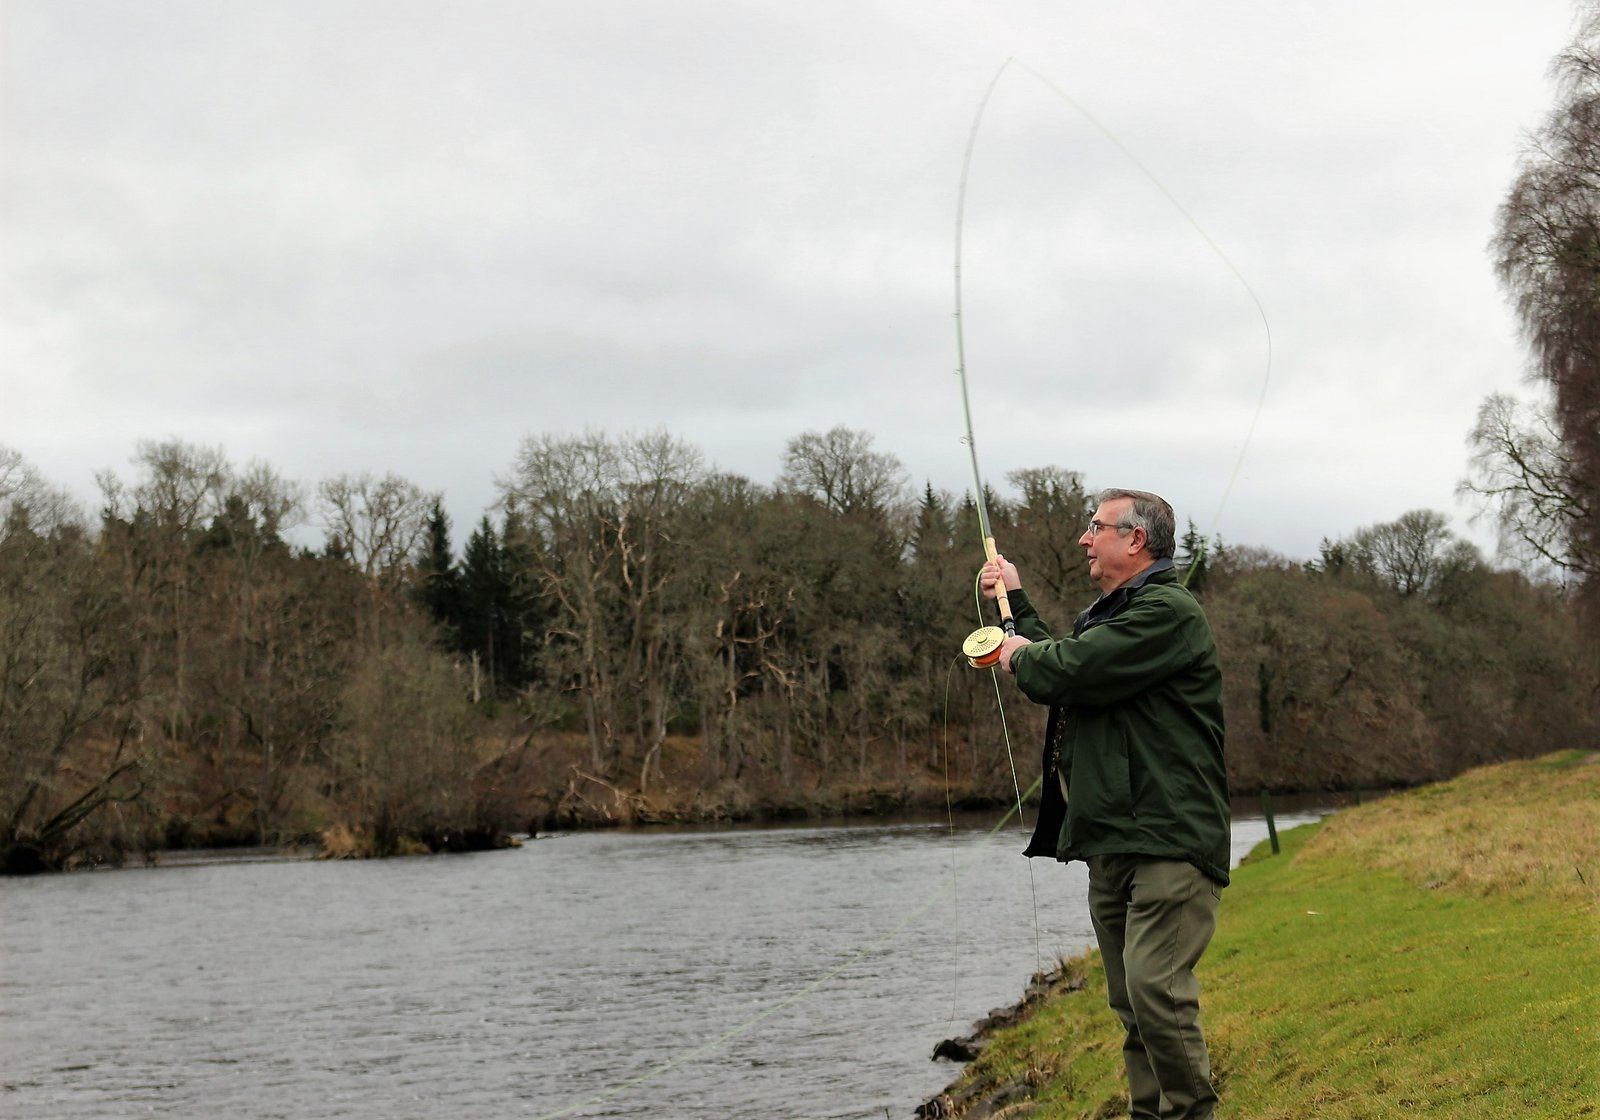 Frank Durdle making the First cast to officially open the River Beauly season.